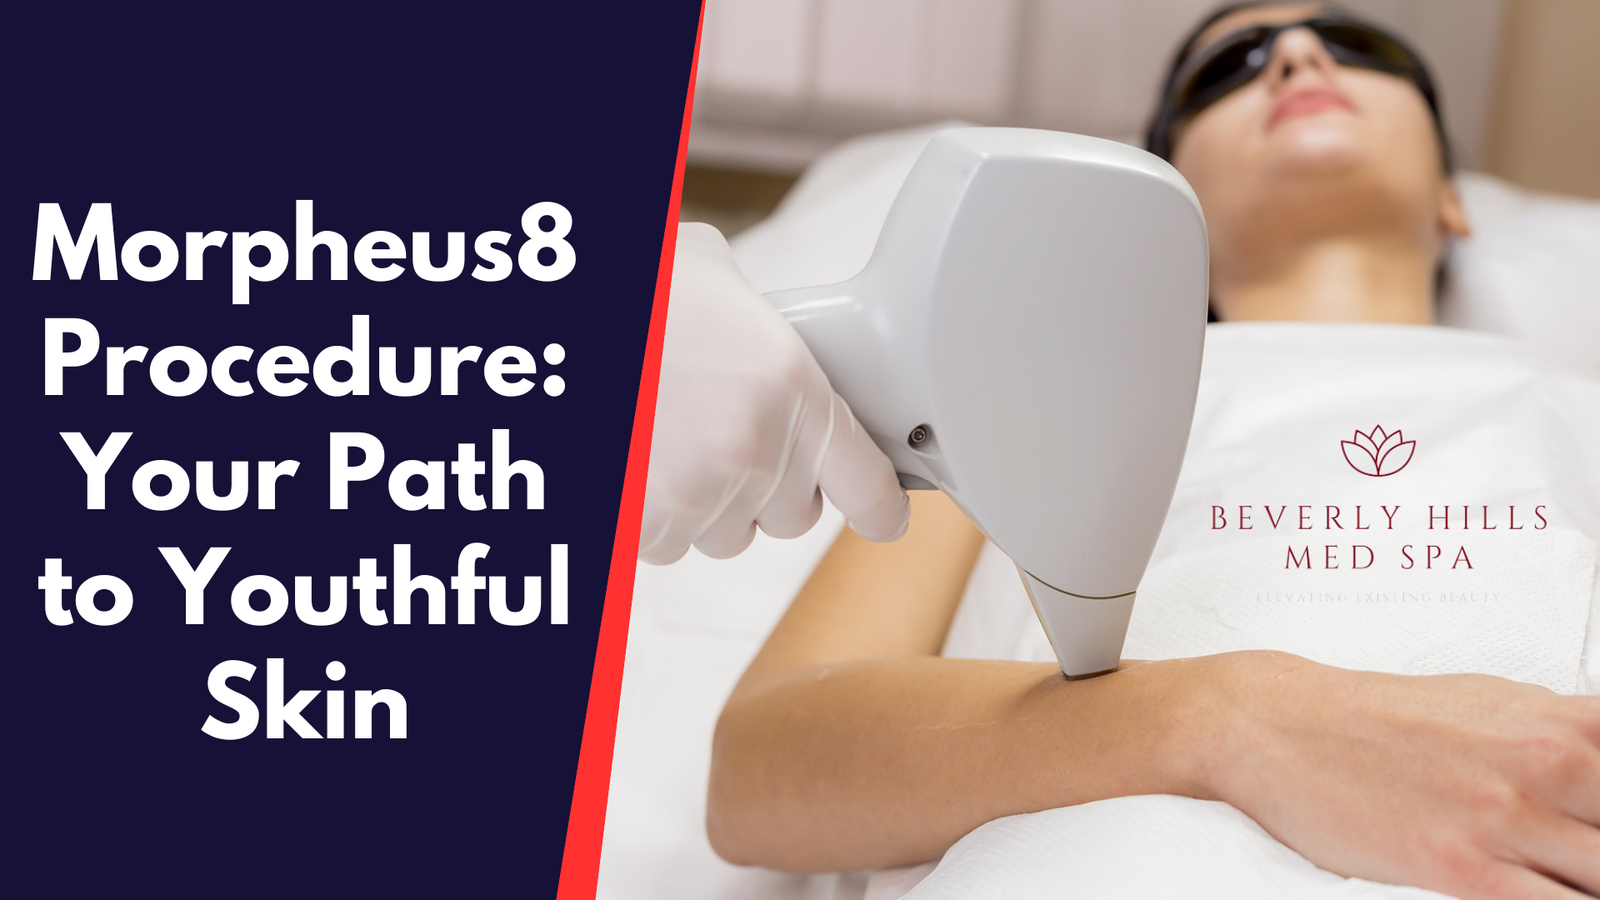 Morpheus8 Procedure: Your Path to Youthful Skin